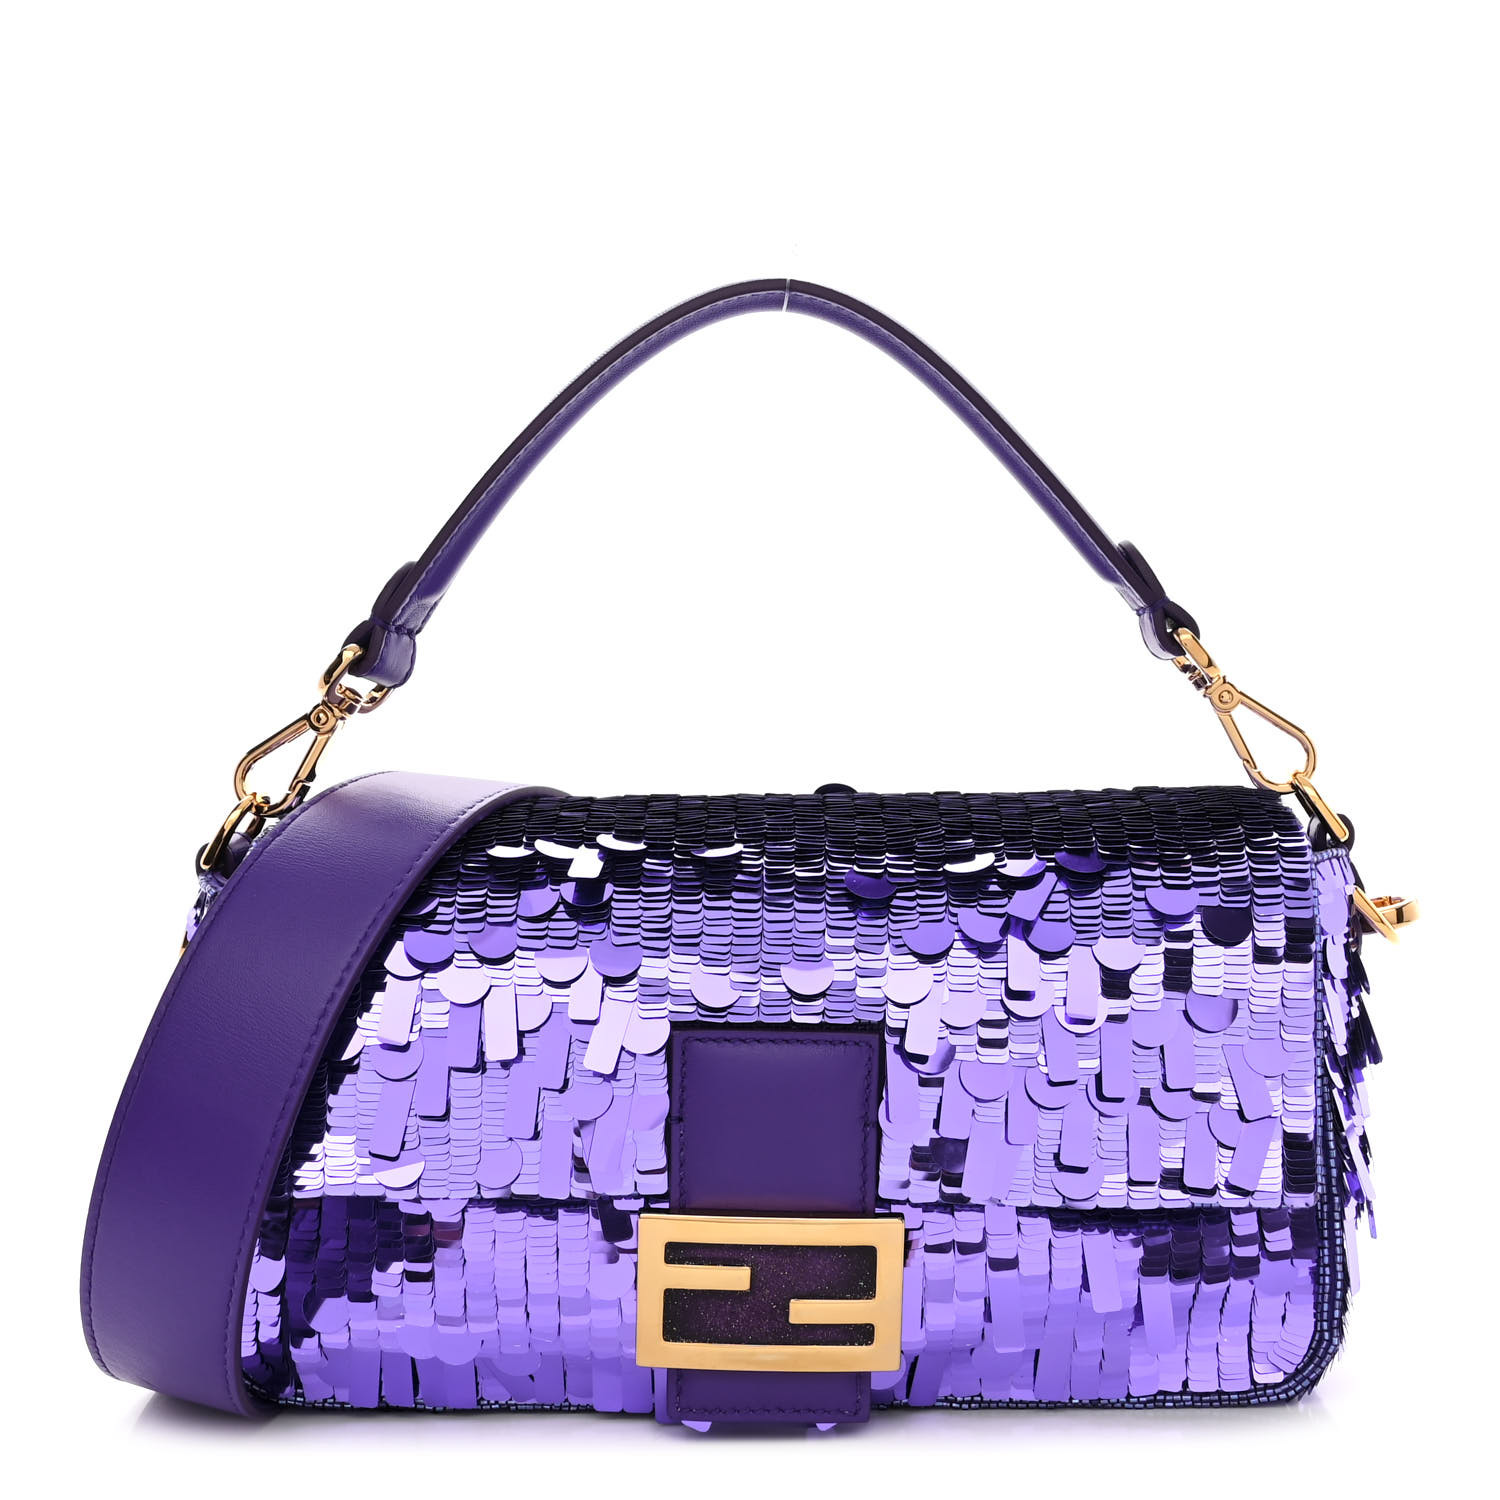 image of FENDI Sequin Paillettes Shiny Nappa Sex and the City Baguette in the color Viola Purple Rain by FASHIONPHILE